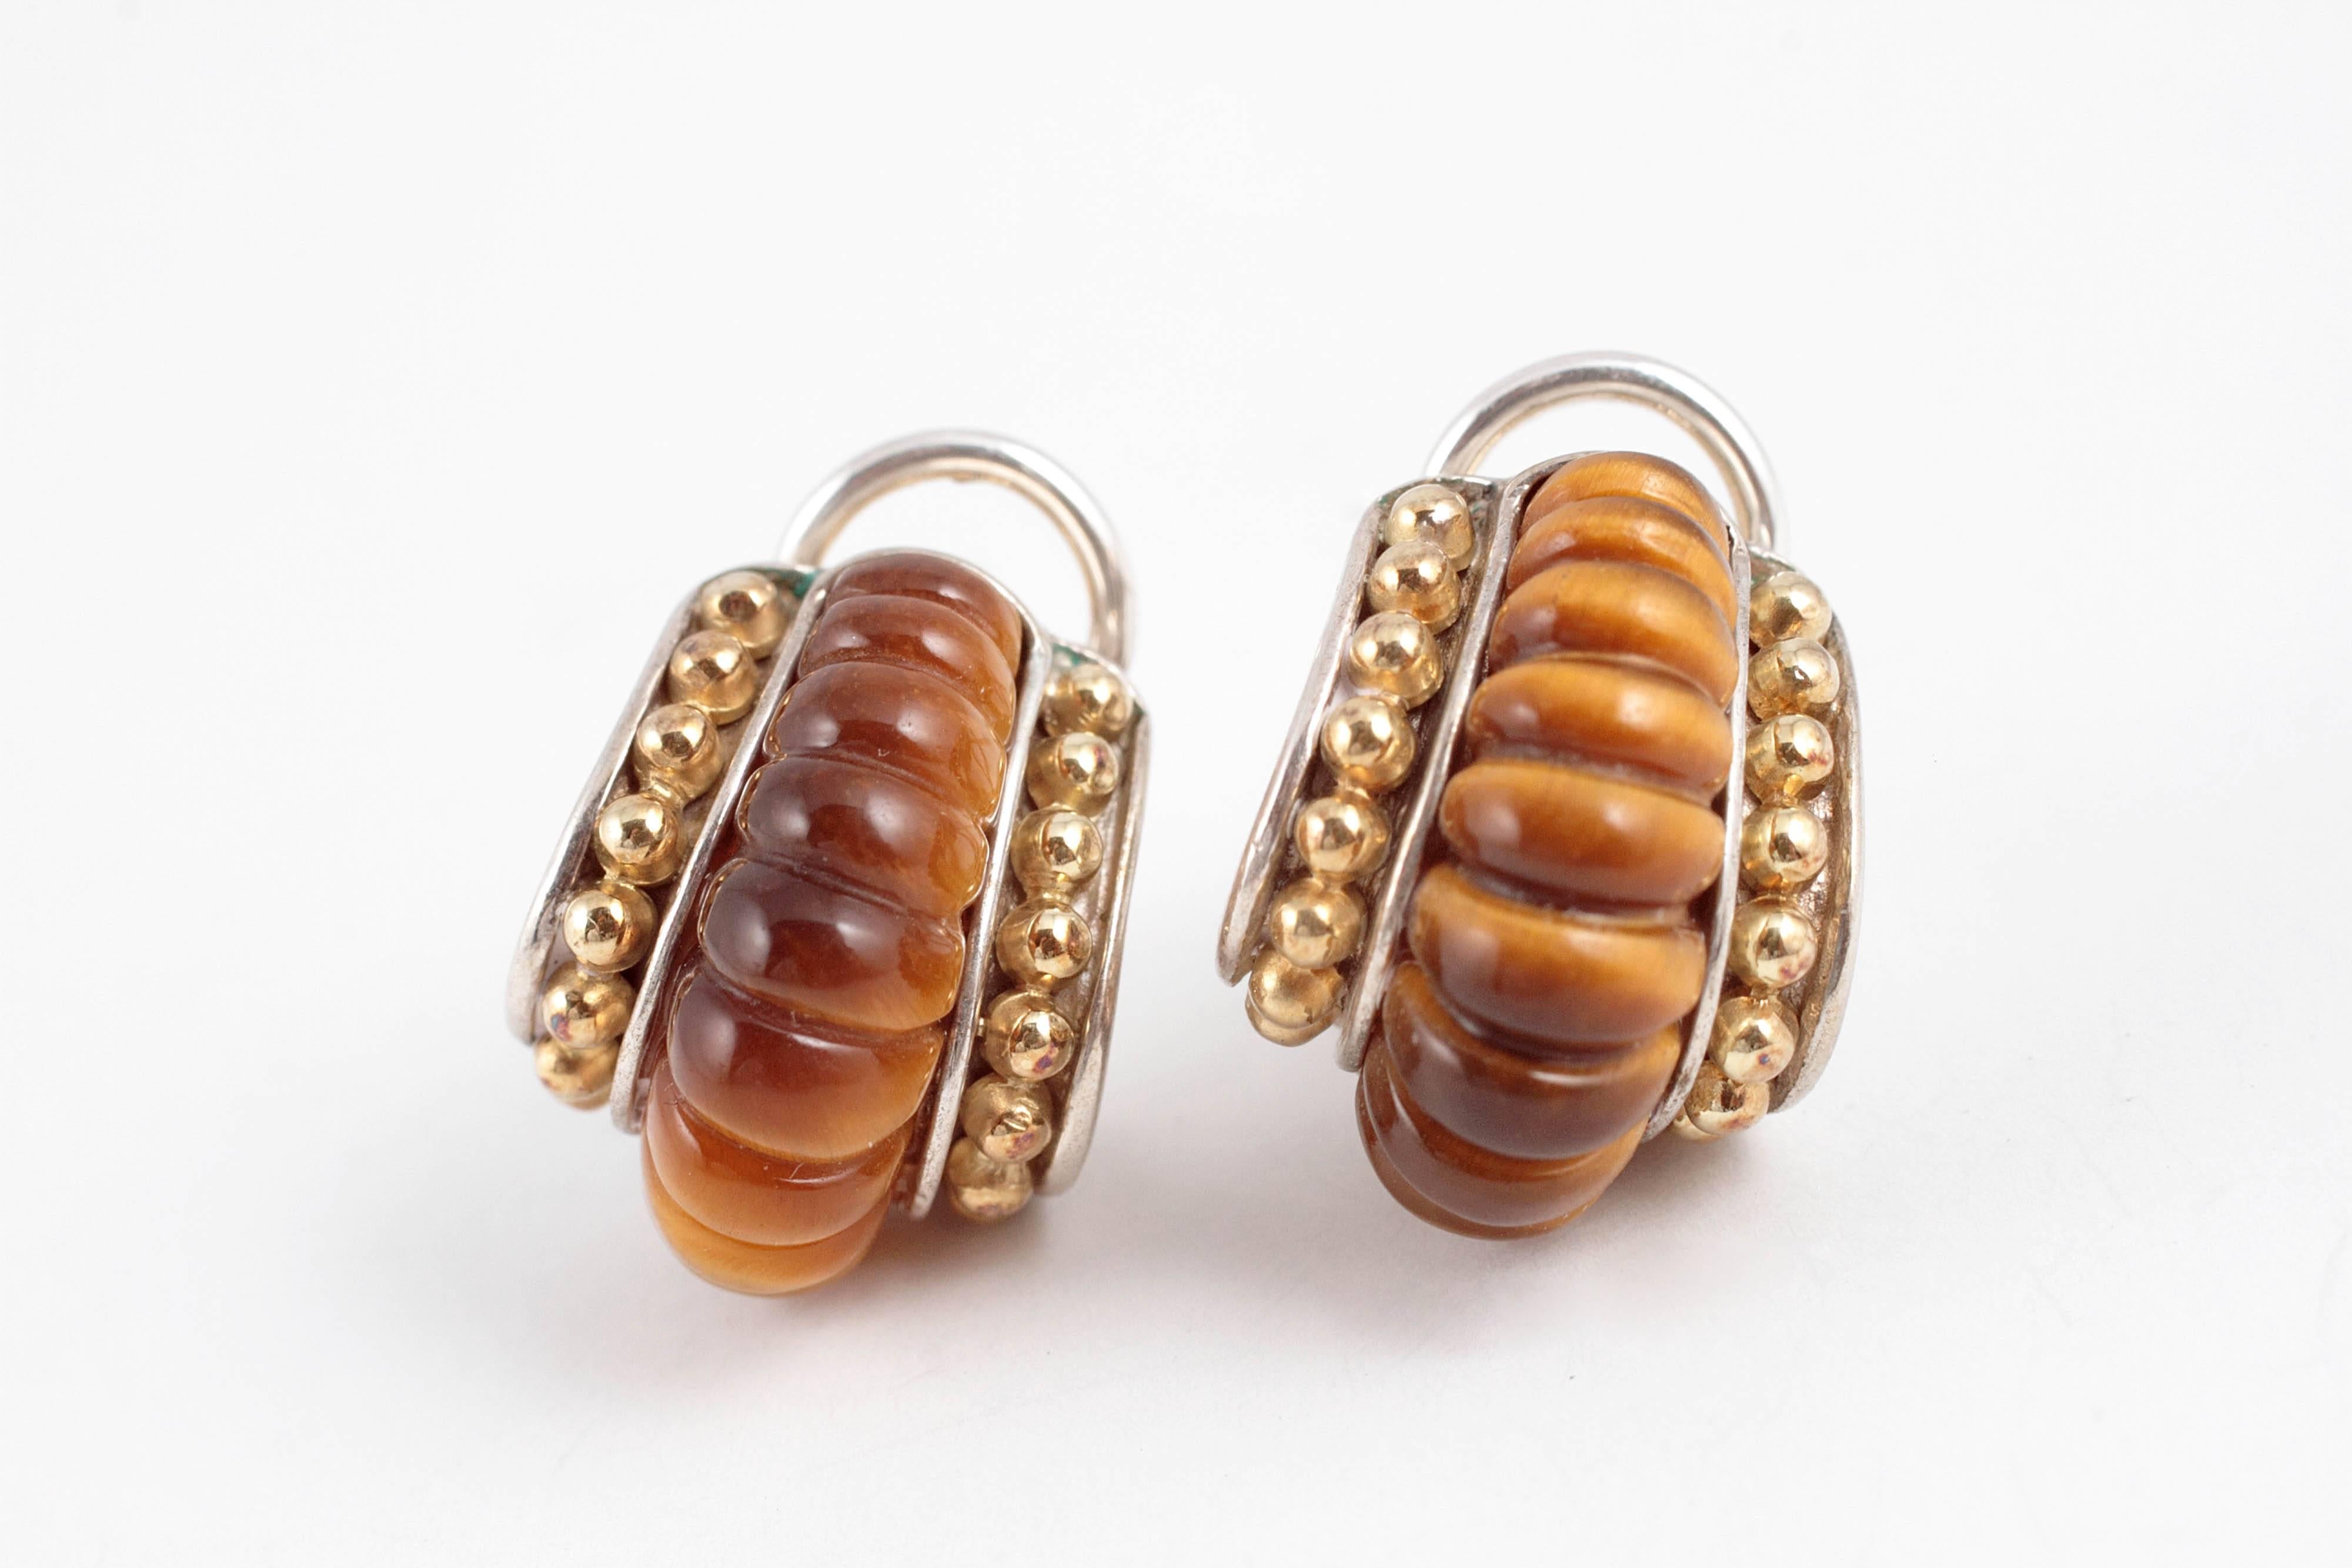 In 18 karat yellow gold and sterling silver.  The beautiful Tigers Eye is in so many shades of brown!  Pierced/clip back.